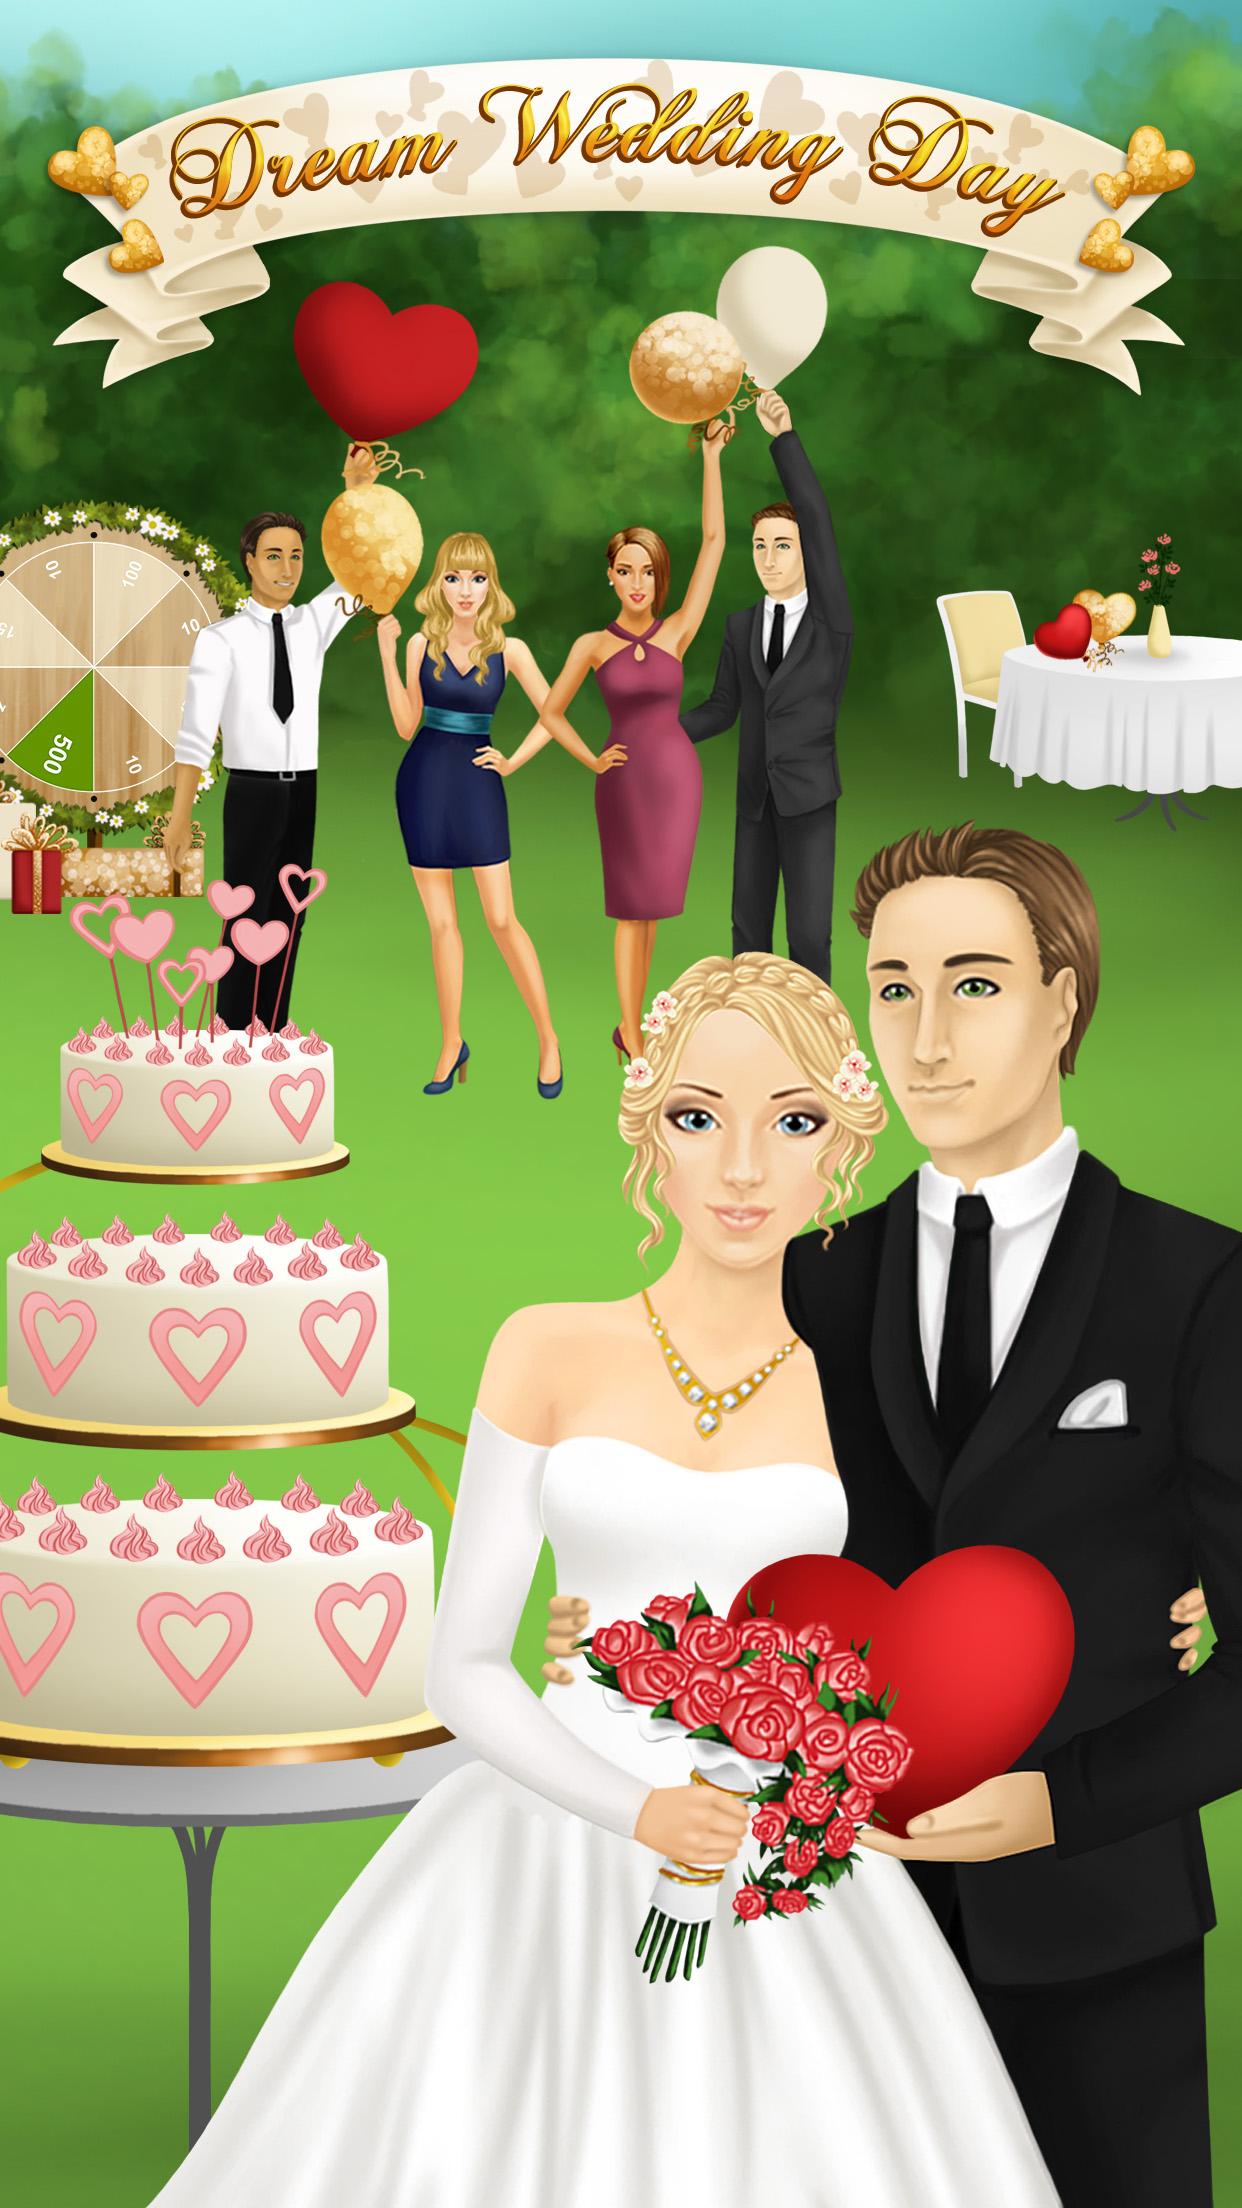 Android application Dream Wedding Day - No Ads screenshort